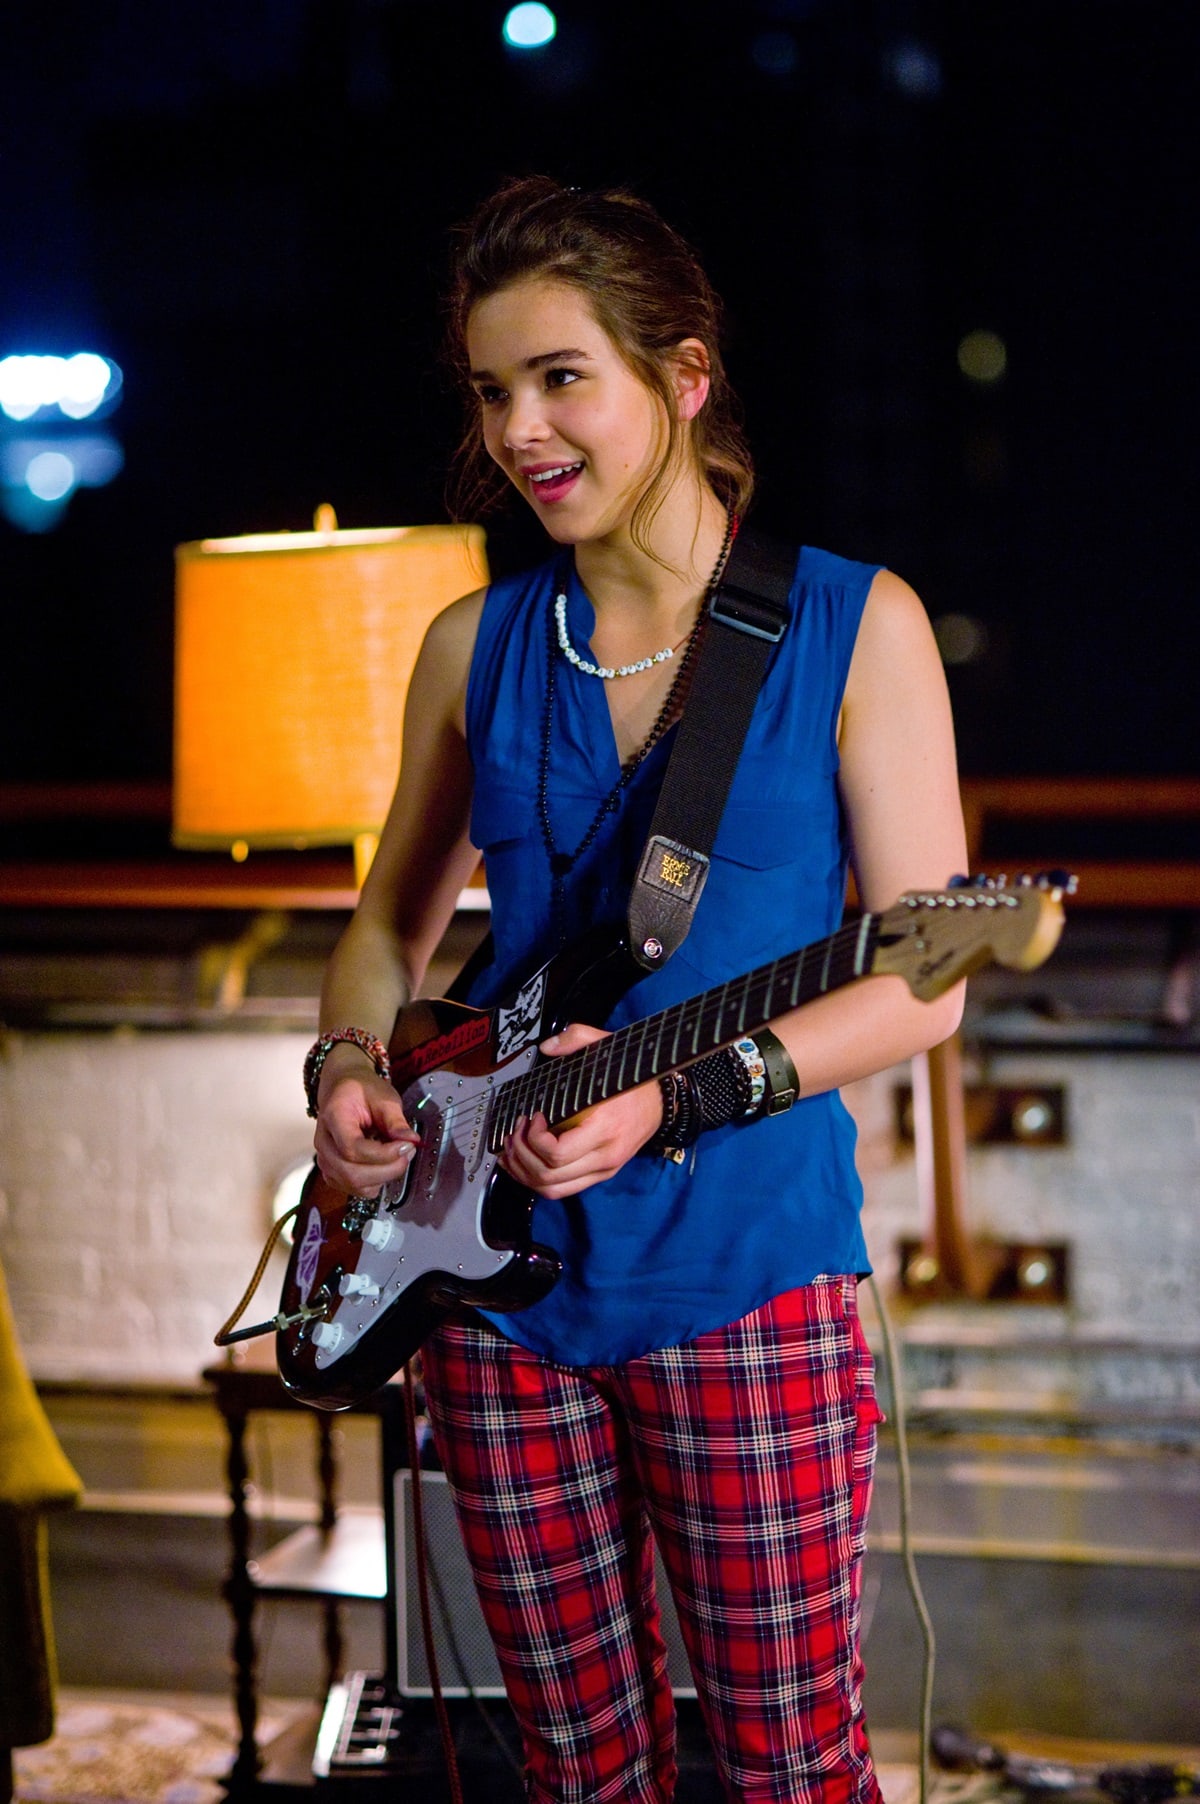 Steinfeld learned to play the guitar for her role as Violet Mulligan in the 2013 American musical comedy-drama film Begin Again